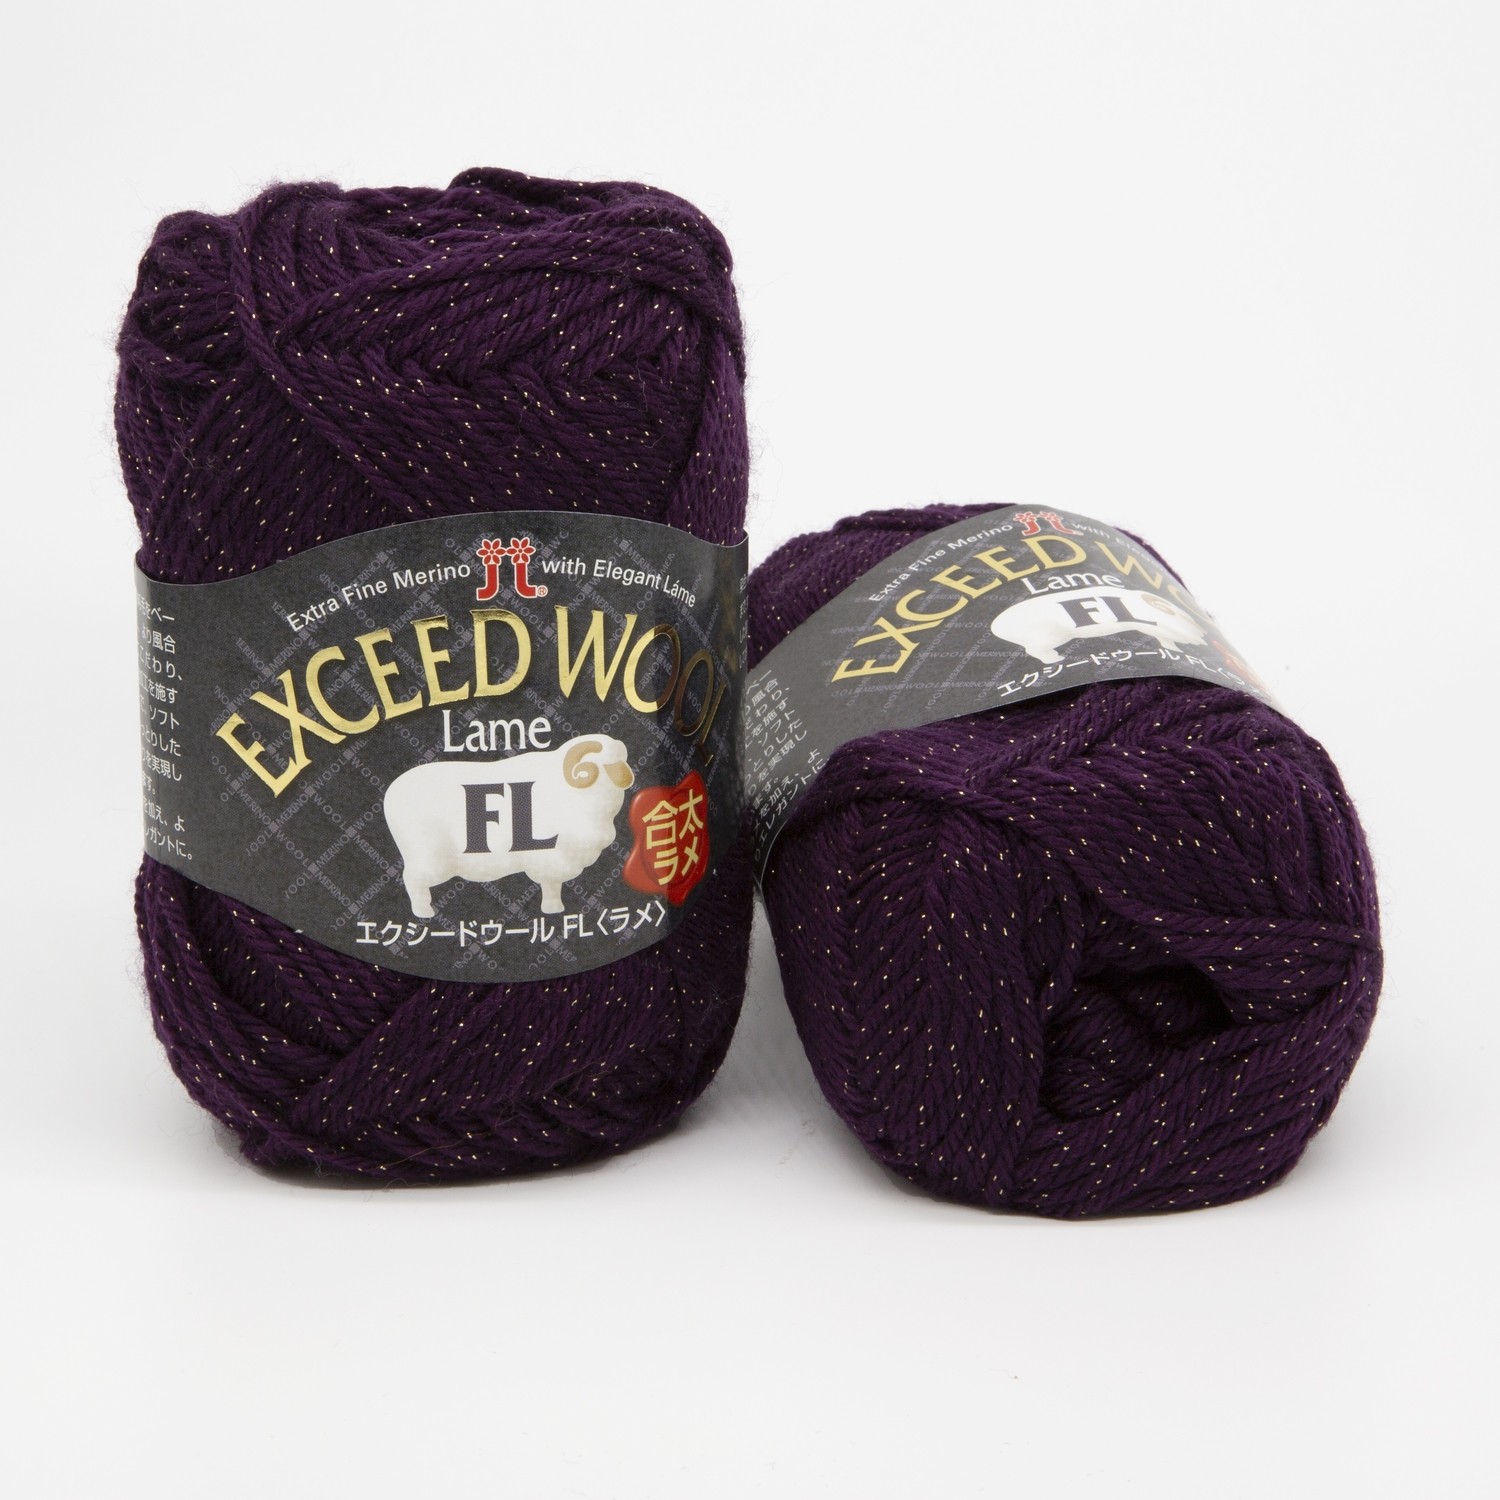 exceed wool баклажан 505